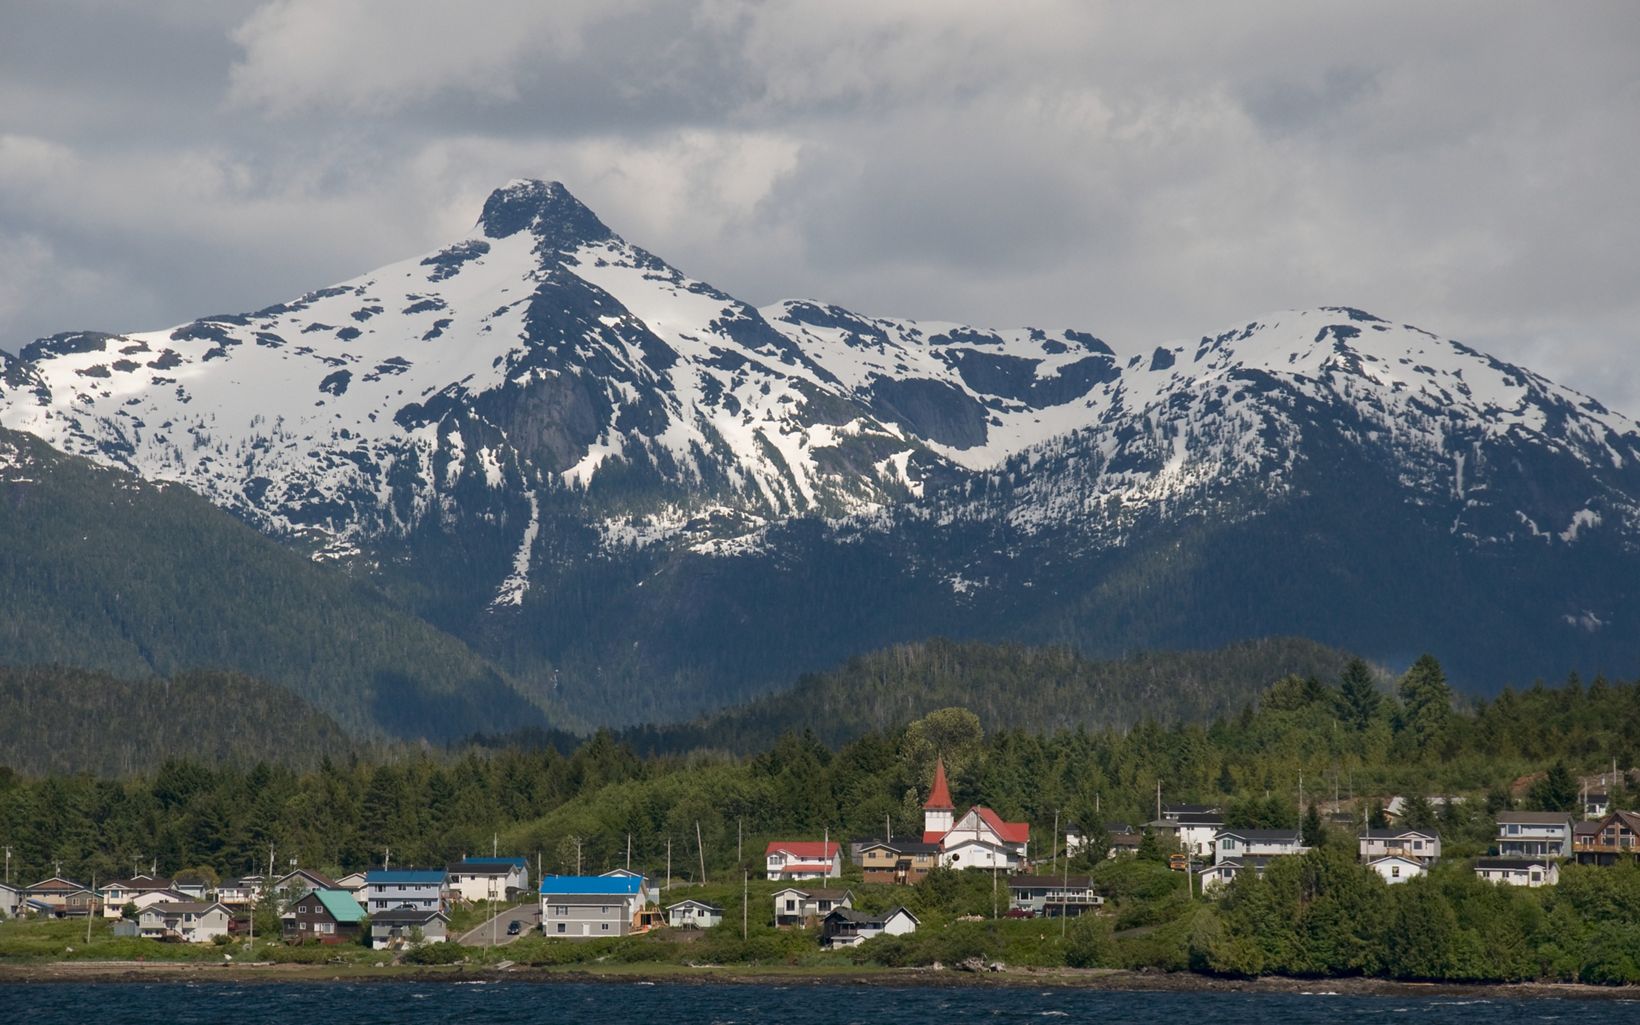 Usually called Port Simpson, an Indigenous community in British Columbia, not far from the city of Prince Rupert.